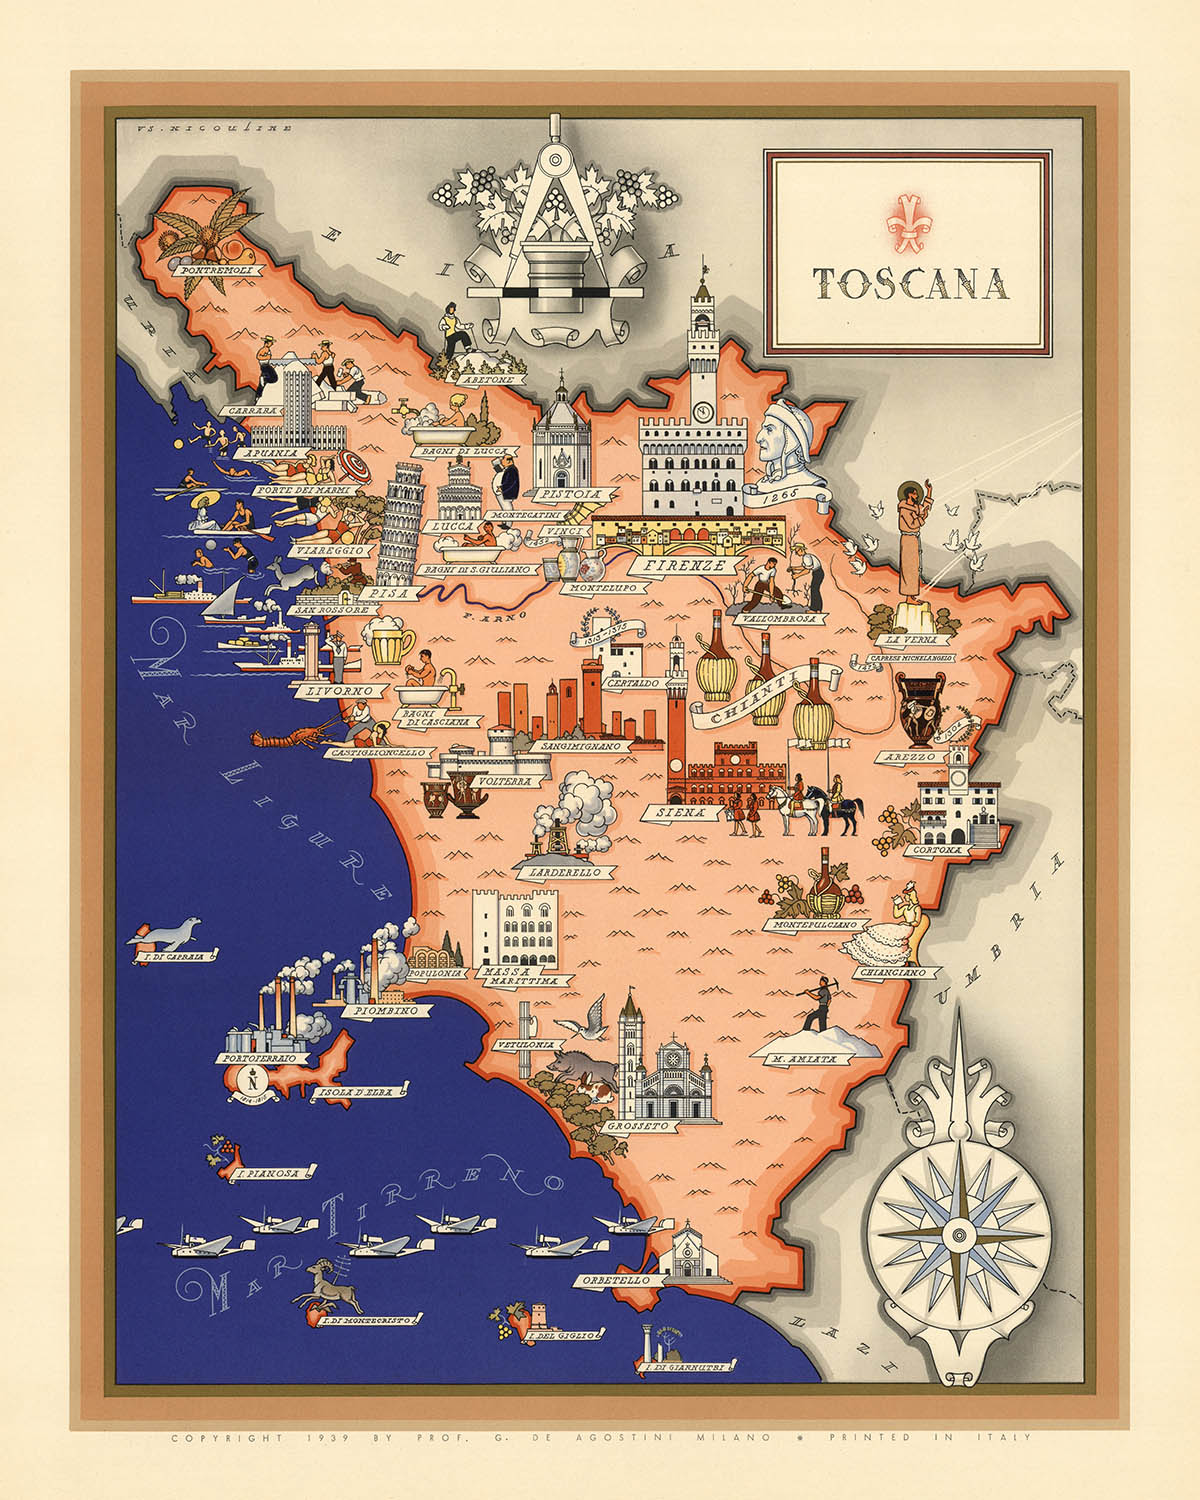 Old Pictorial Map of Tuscany by De Agostini, 1938: Pisa, Florence, Siena, Tuscan Archipelago, Foreste Casentinesi